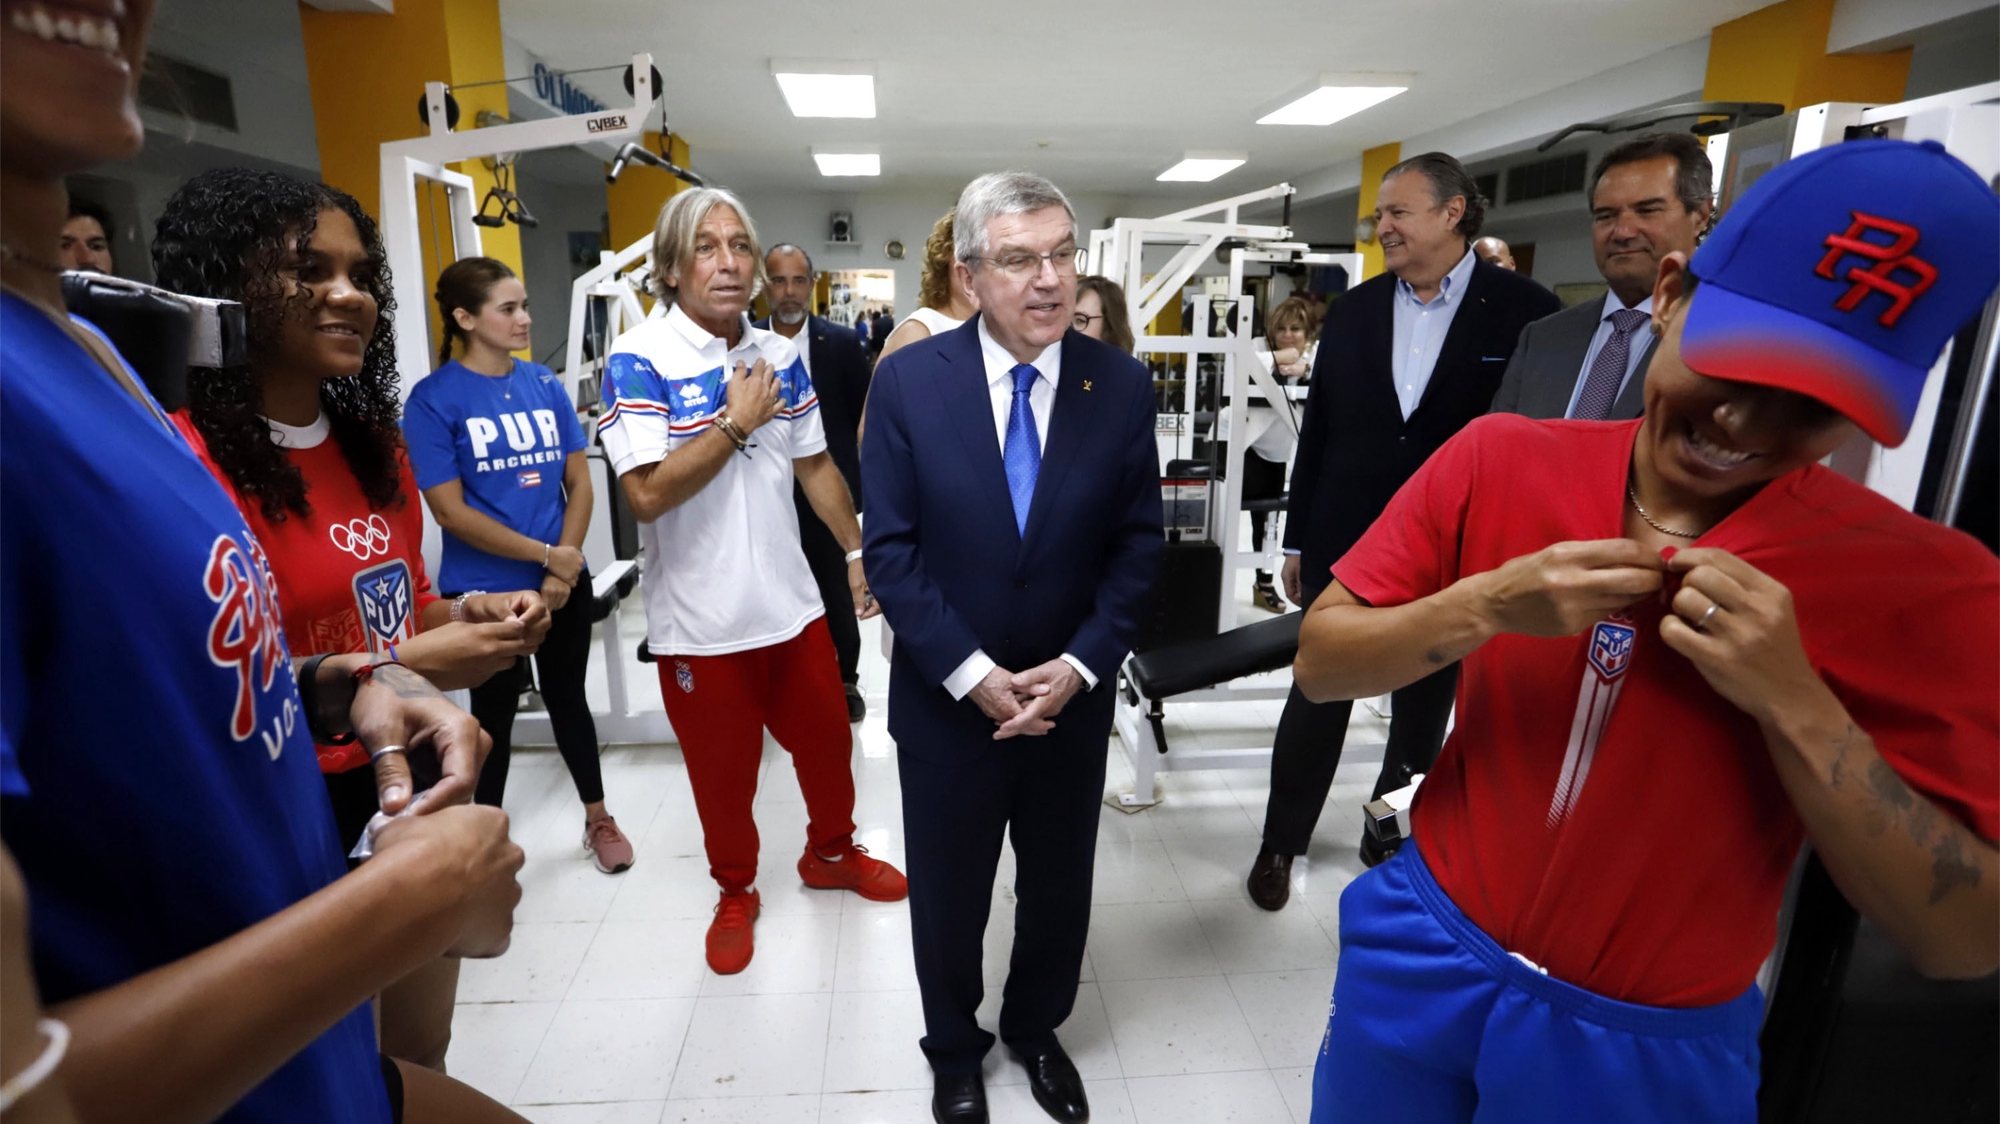 epa10508256 The president of the International Olympic Committee, Thomas Bach (C), greets athletes during a visit to the headquarters of the Puerto Rico Olympic Committee (Copur), in San Juan, Puerto Rico, 07 March 2023. The president of the International Olympic Committee, Thomas Bach, arrived in Puerto Rico on 07 March to meet with authorities and athletes and celebrate the 75th anniversary of the local Olympic Committee (Copur) on the island. Bach kicked off his Central American and Caribbean tour in Costa Rica, followed by Cuba, Jamaica and the Dominican Republic. After his two-day visit to Puerto Rico, he will travel to Barbados.  EPA/Thais Llorca